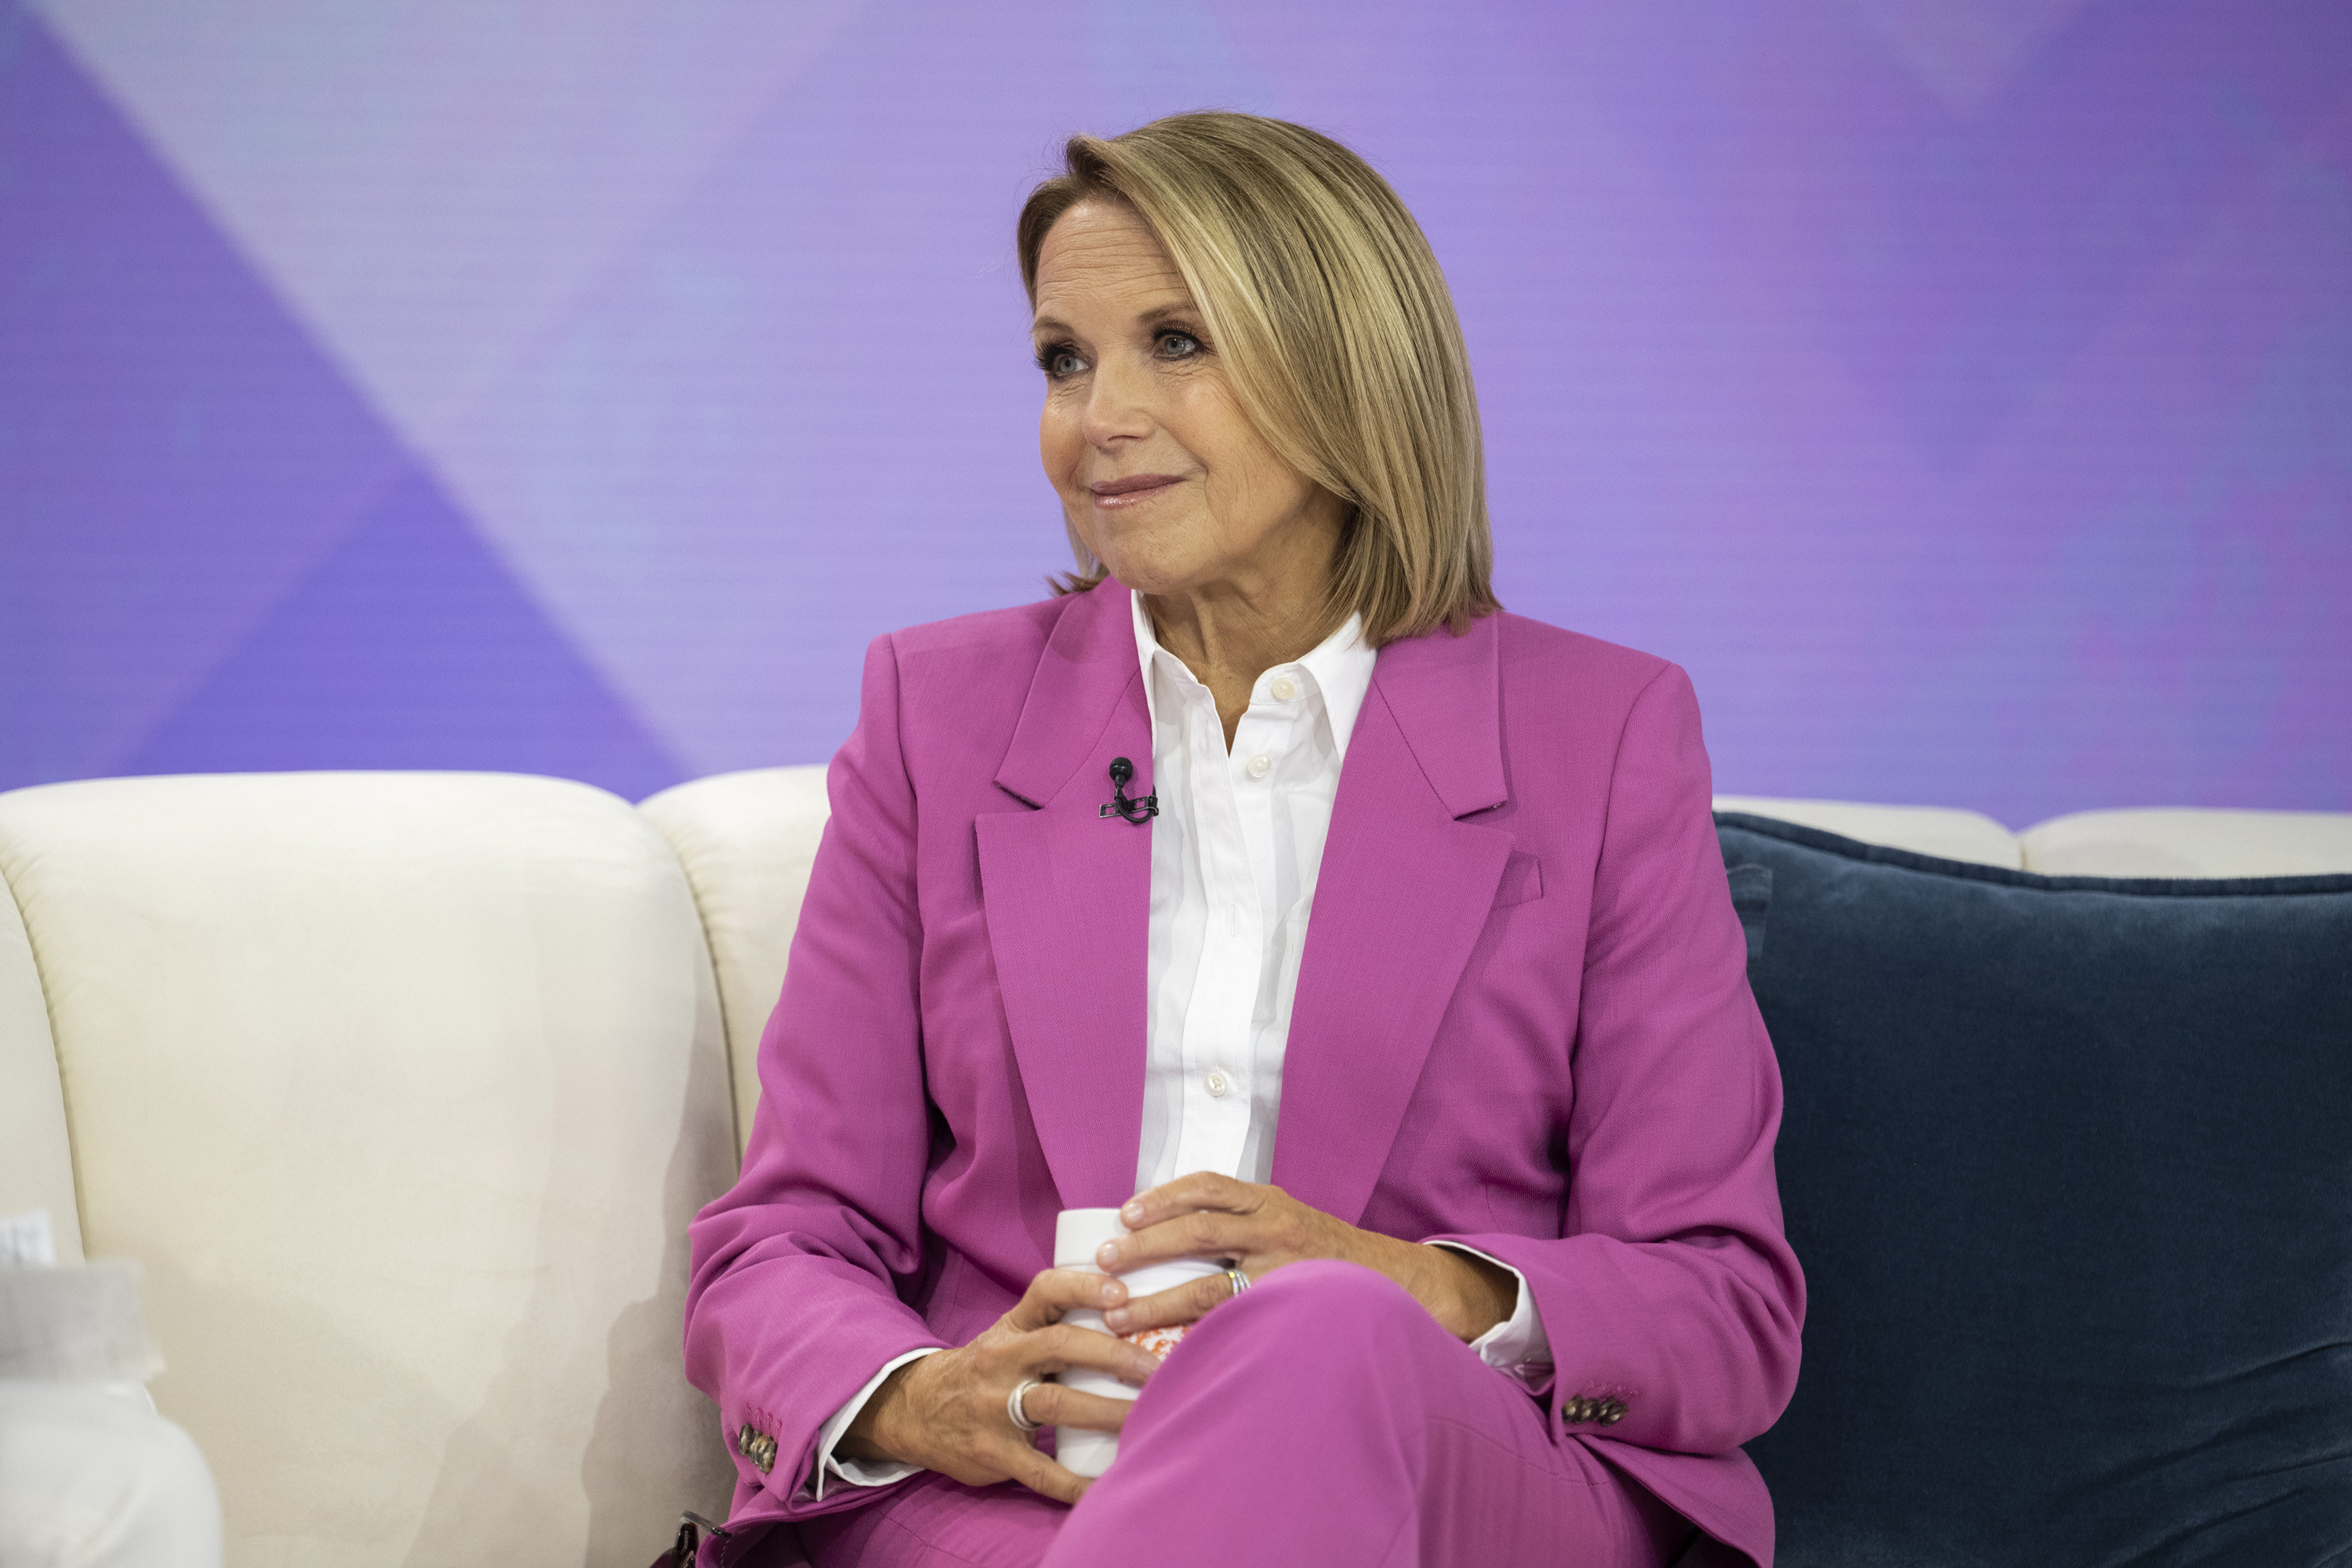 Katie Couric on TODAY in October 2022